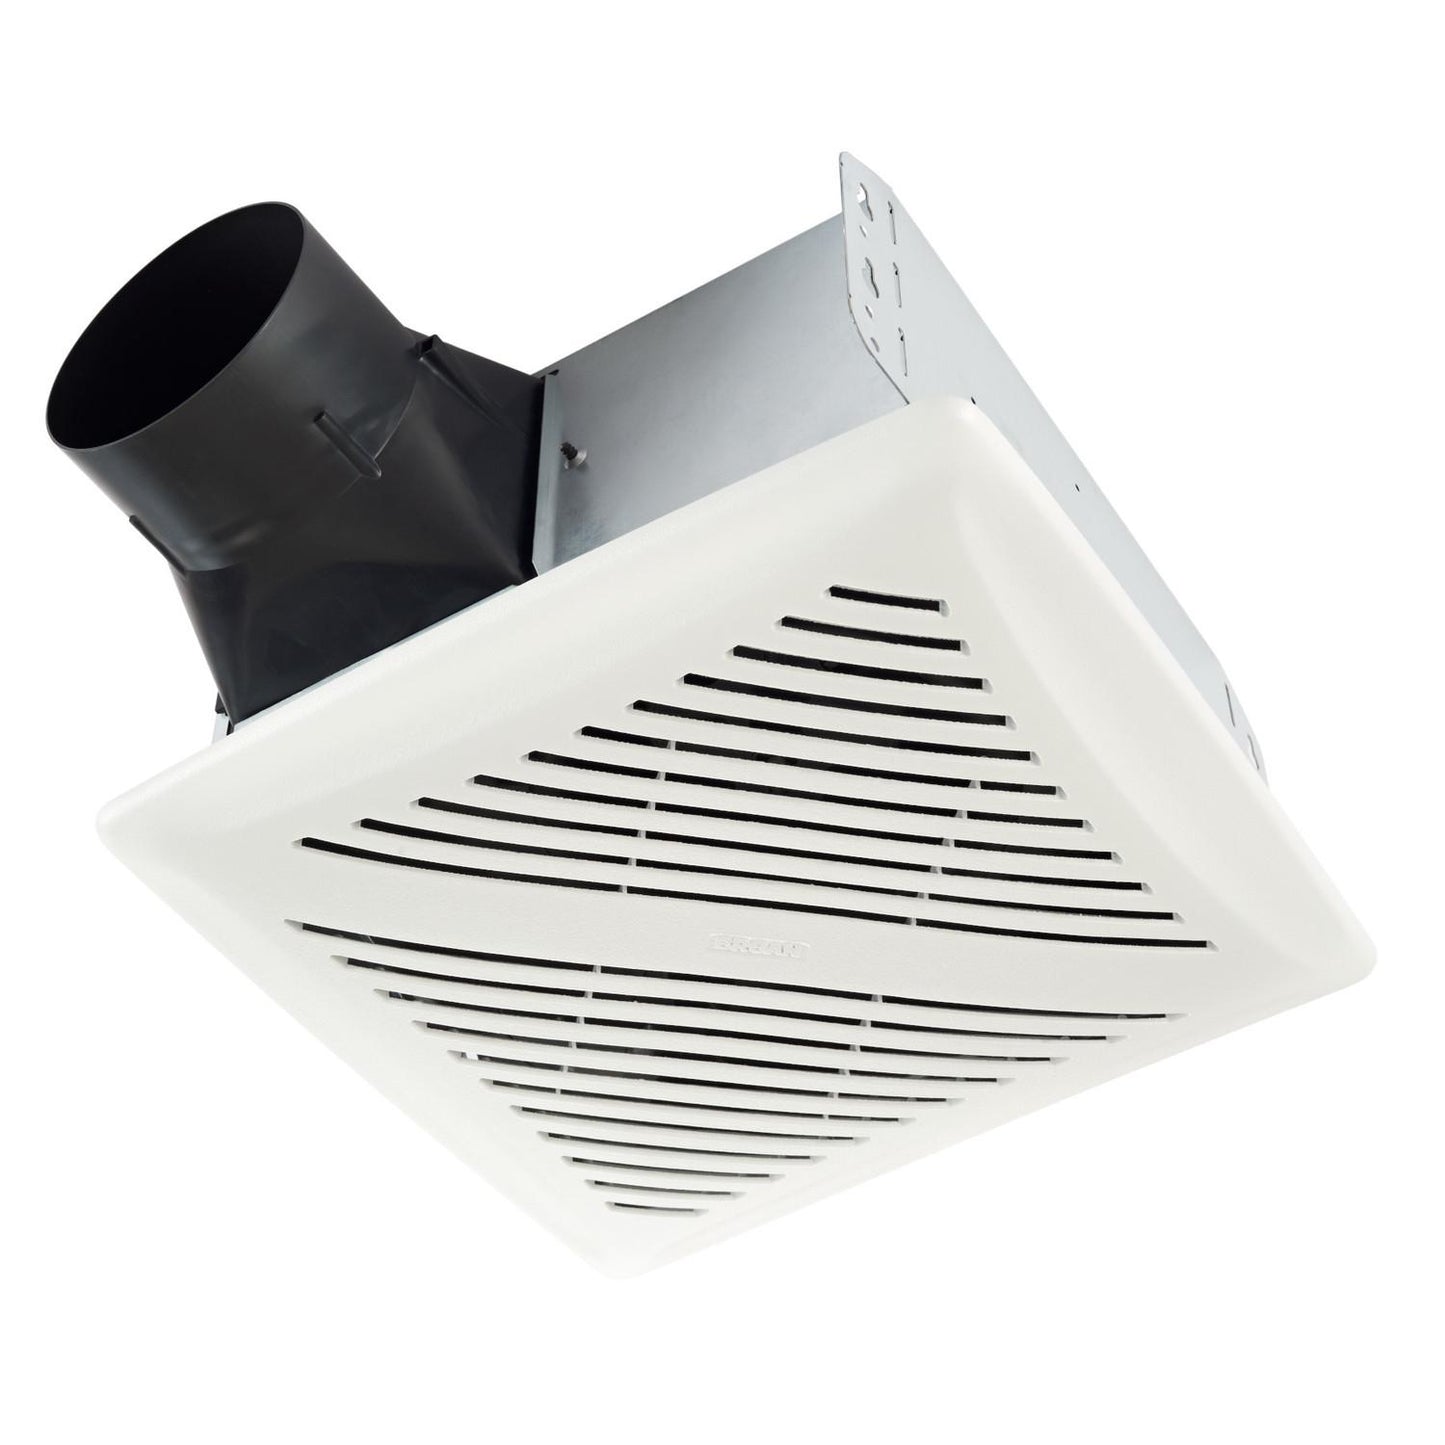 Broan AR80X Broan-Nutone® Wall Vent Kit, 3" Or 4" Round Duct